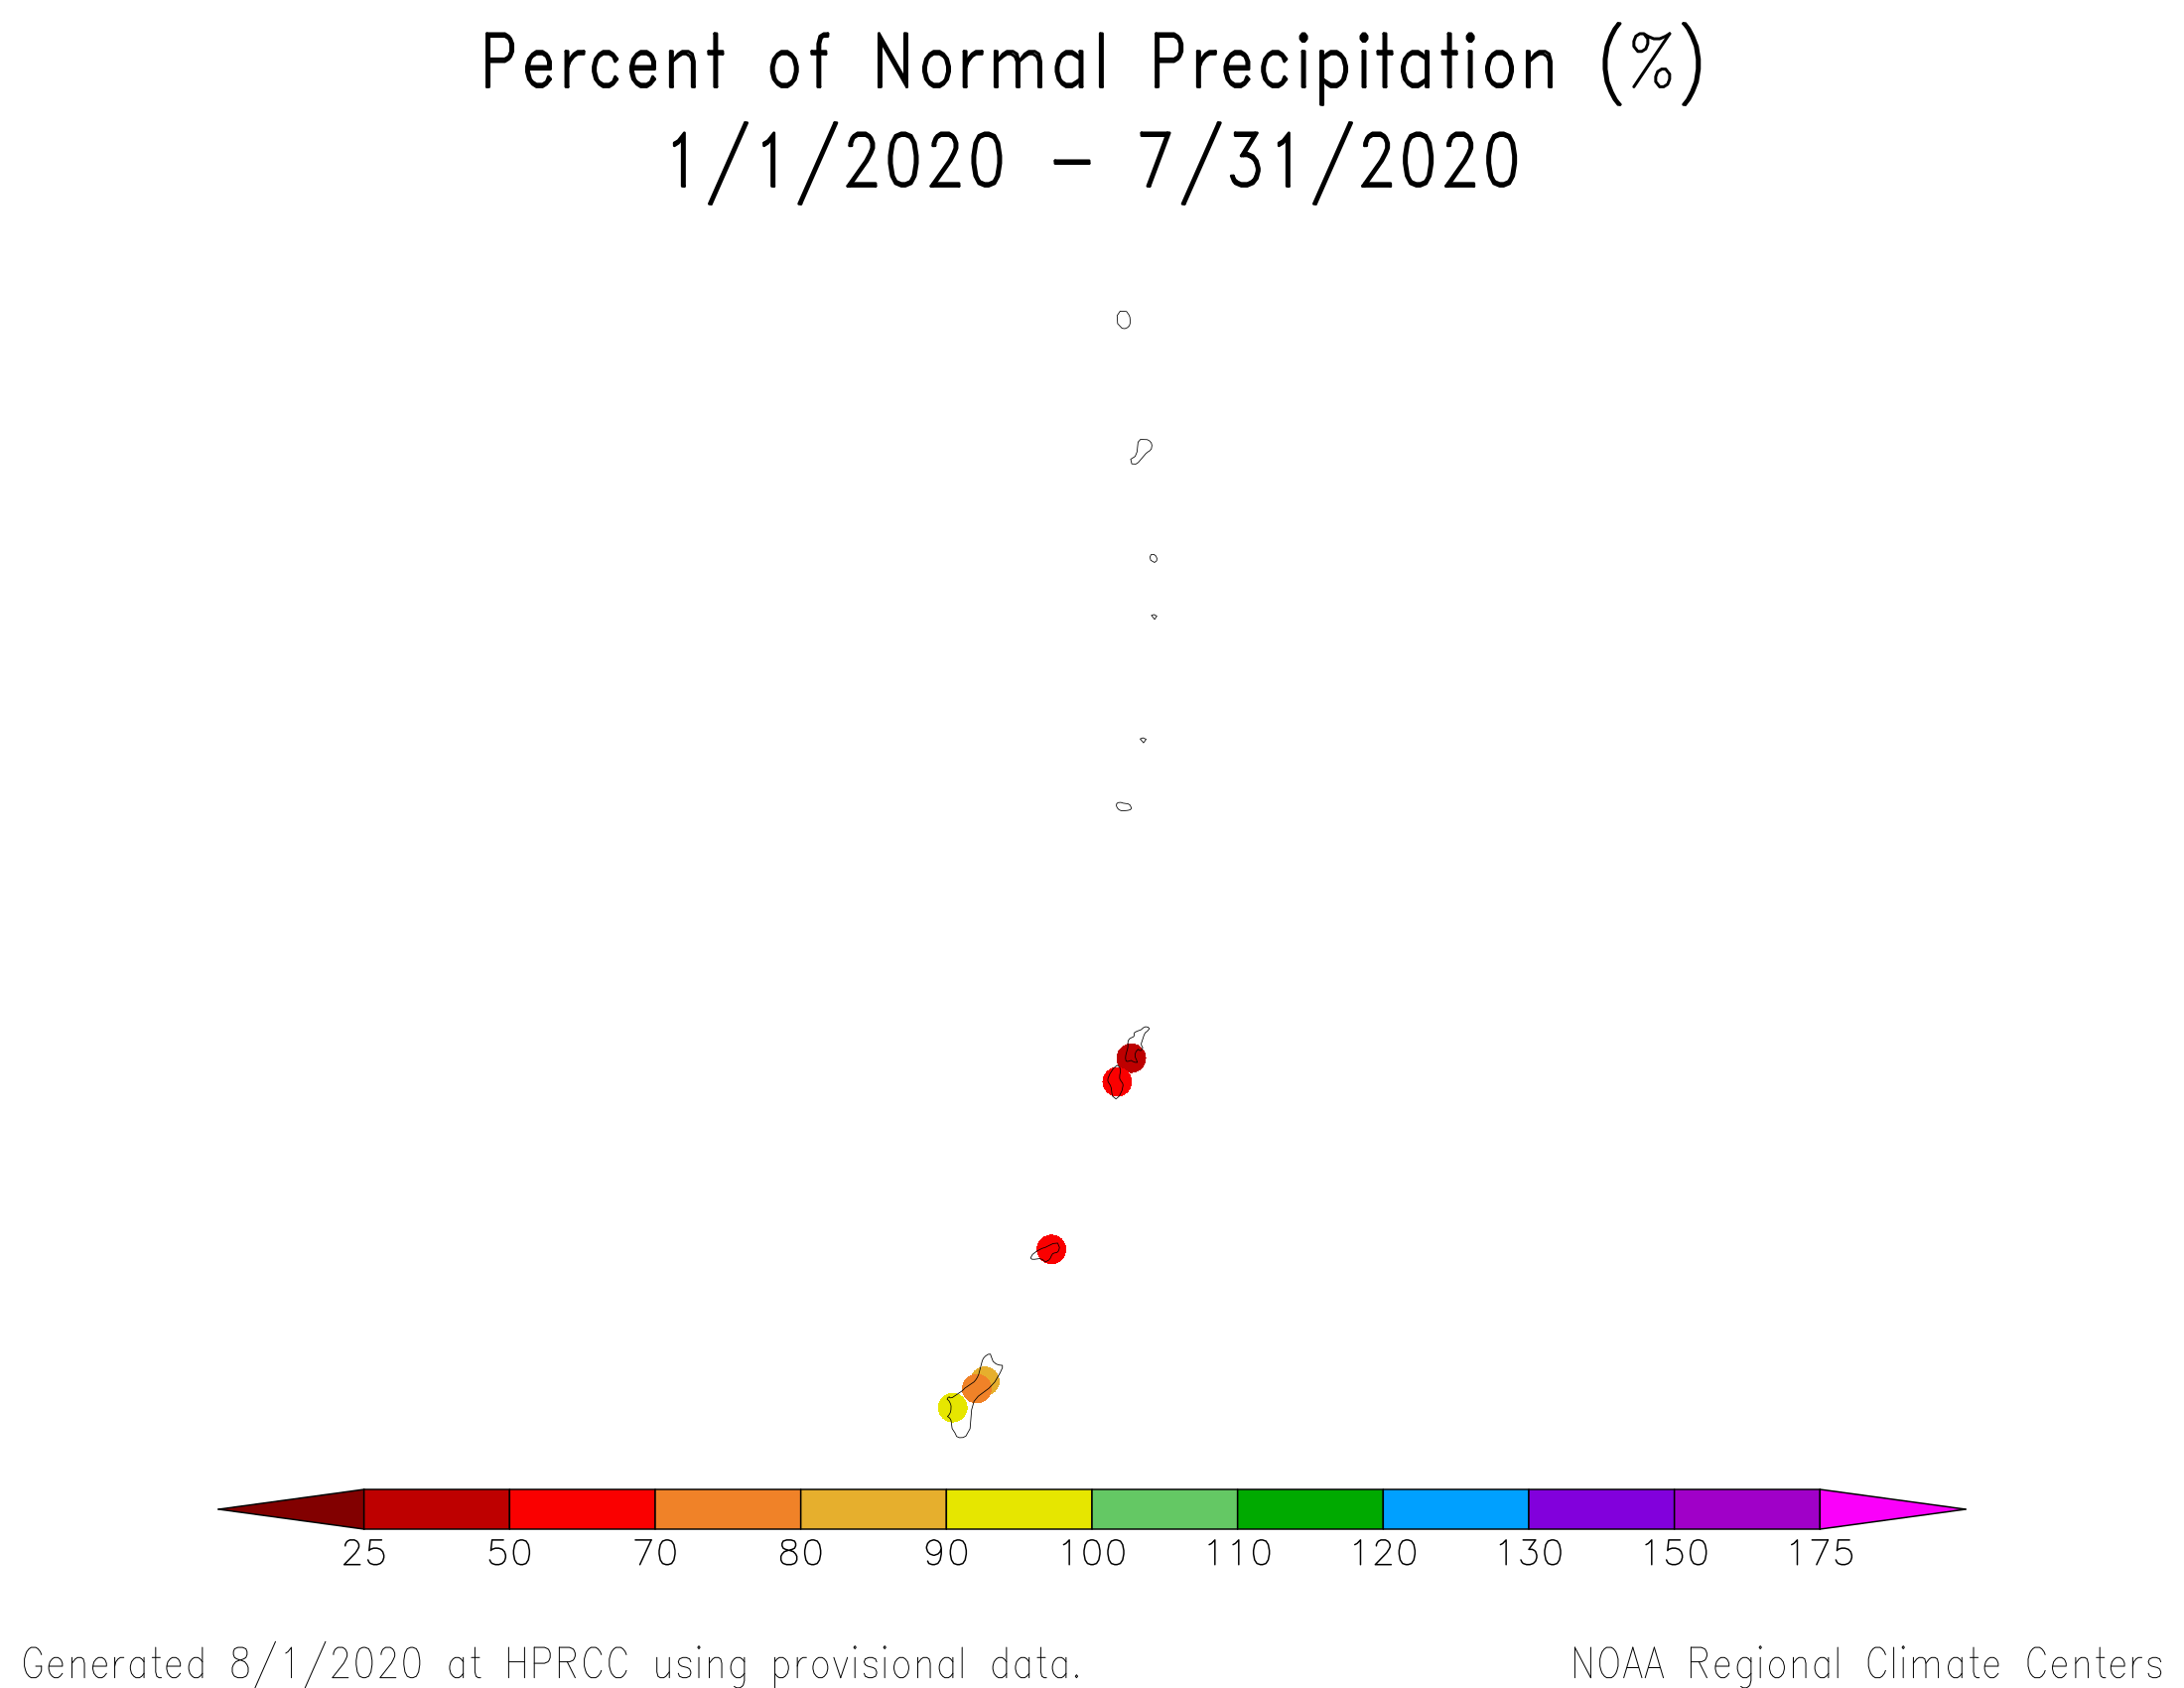 Percent of normal precipitation map for January-July 2020 for the Marianas Islands